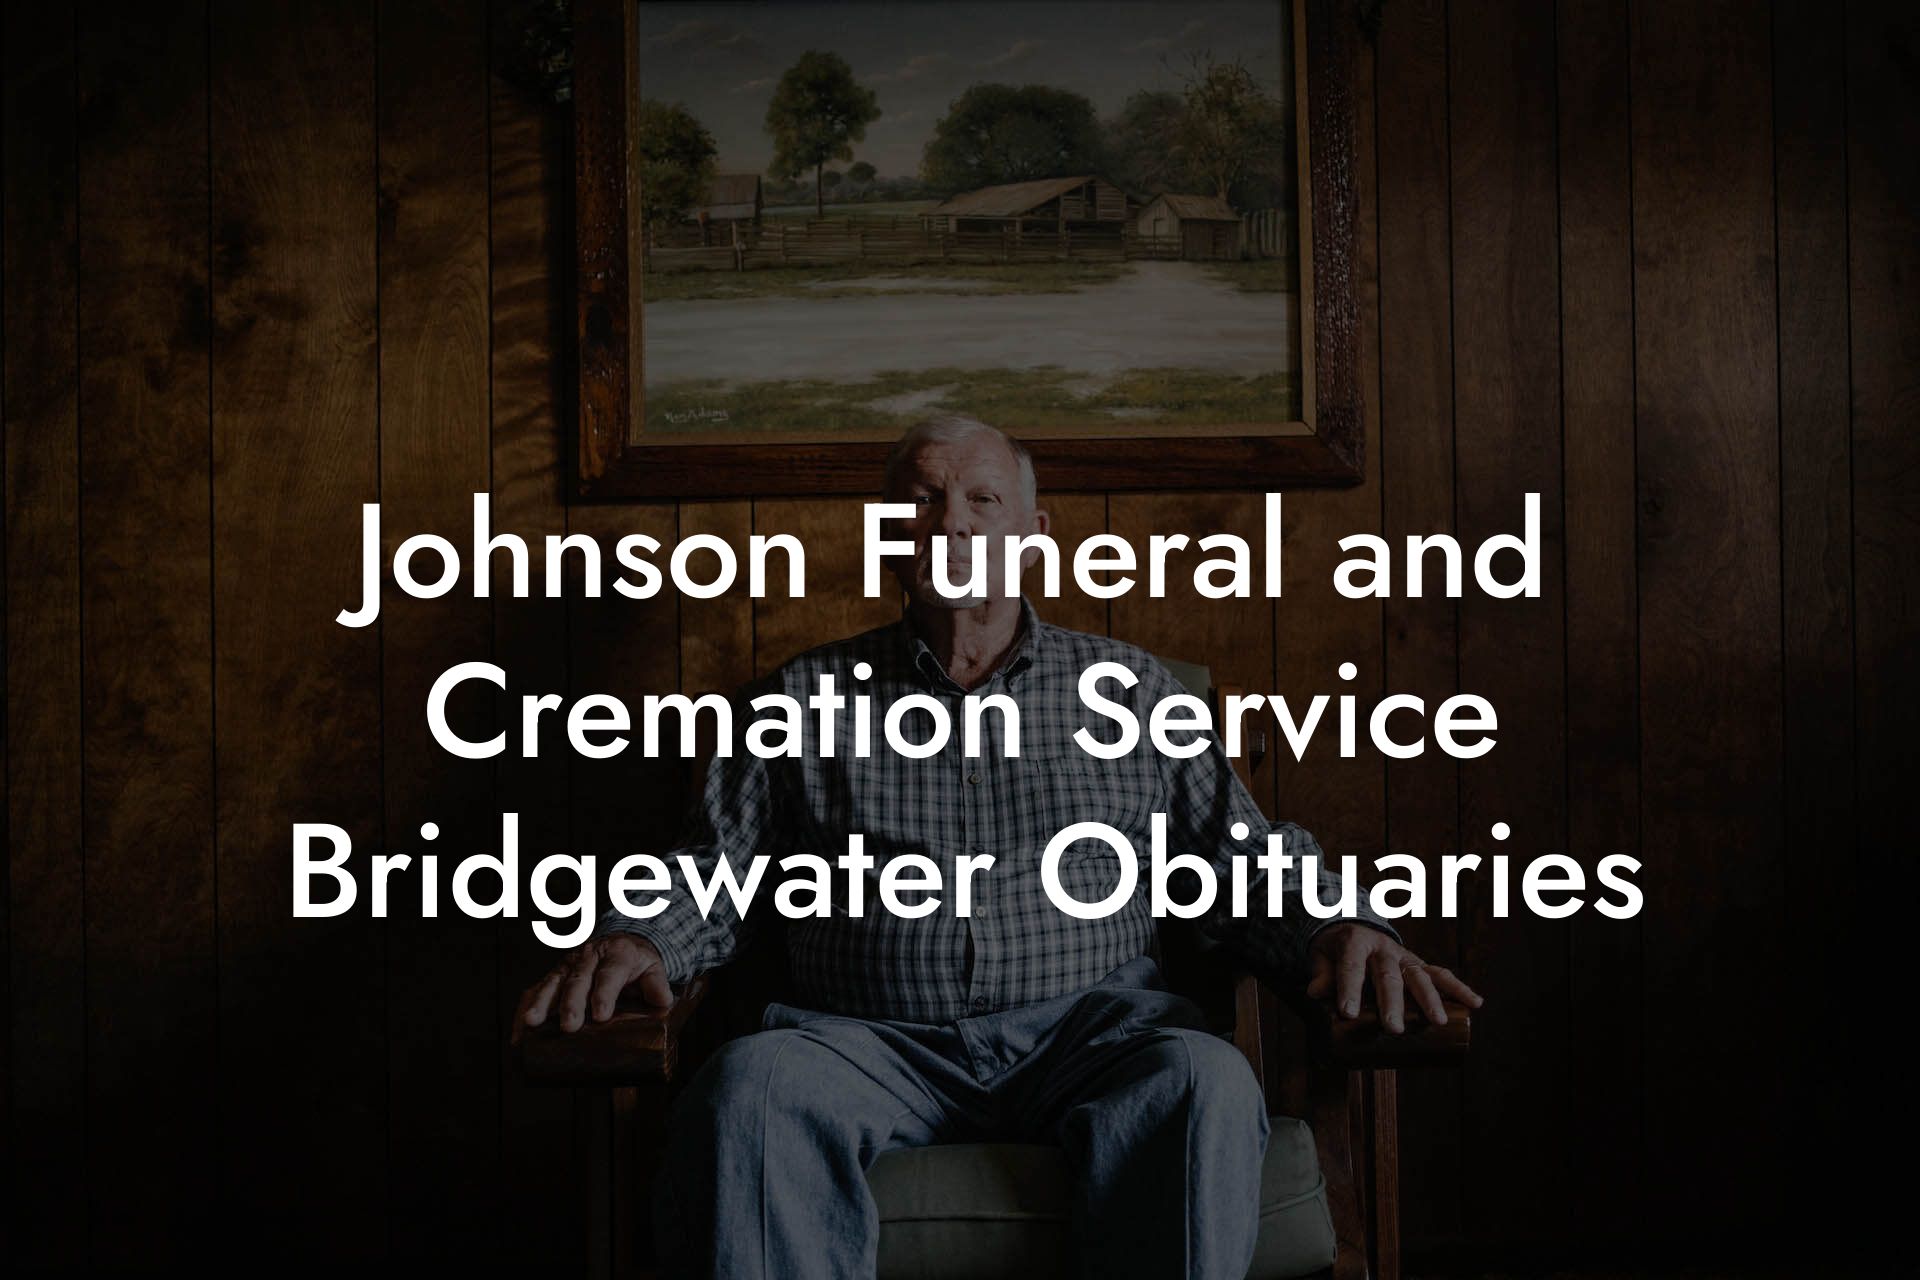 Johnson Funeral and Cremation Service Bridgewater Obituaries